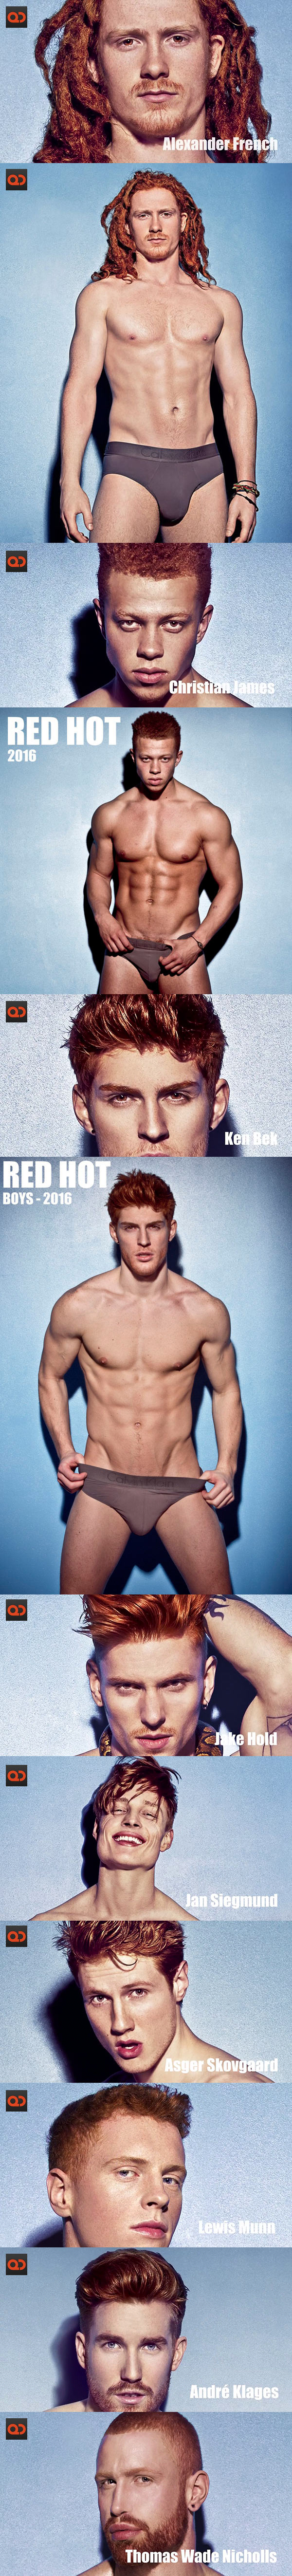 O - M - G! This Calendar Is Full Of Gingers!!! The 2016 Red Hot Calendar Aims To “Rebrand The Ginger Male Stereotype”